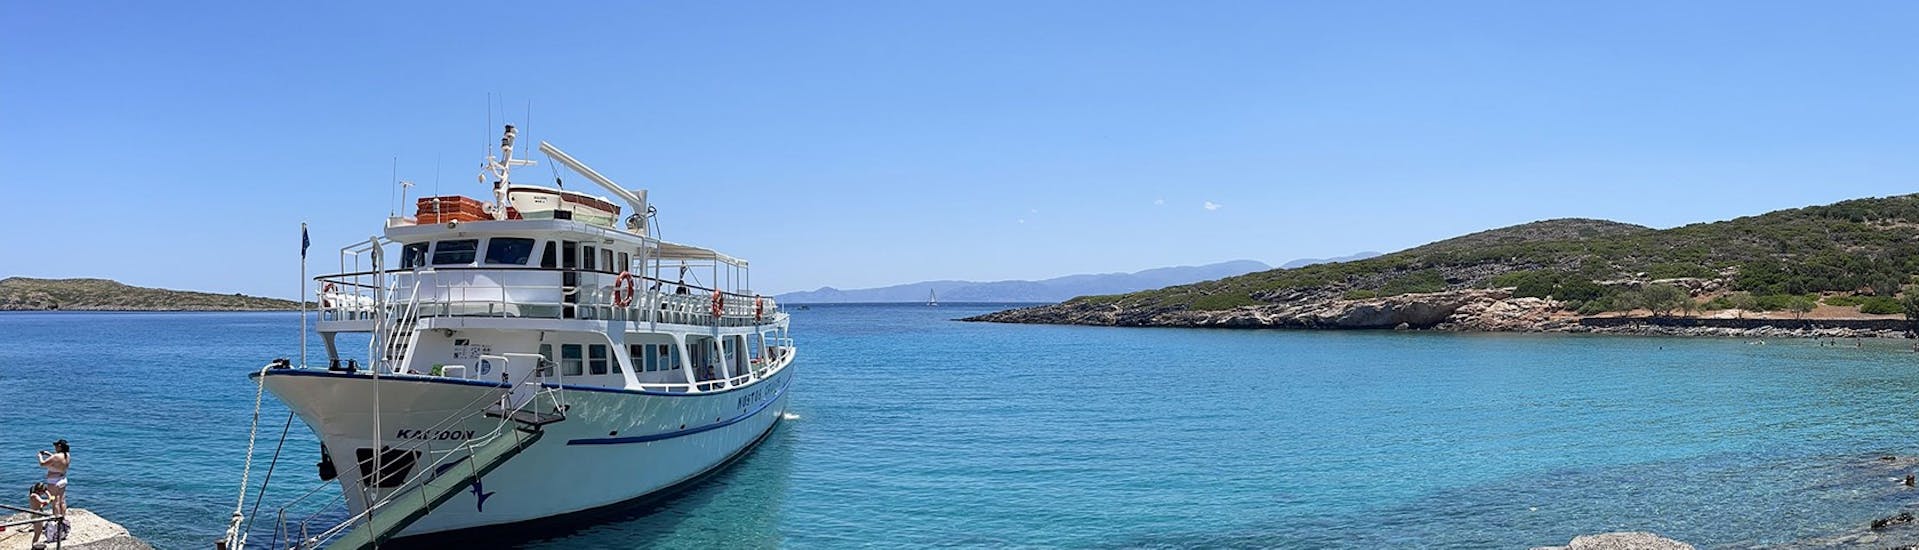 The boat is moored and waiting for you to start the Boat Trip around Mirabello Bay with Swimming with Nostos Cruises Crete.